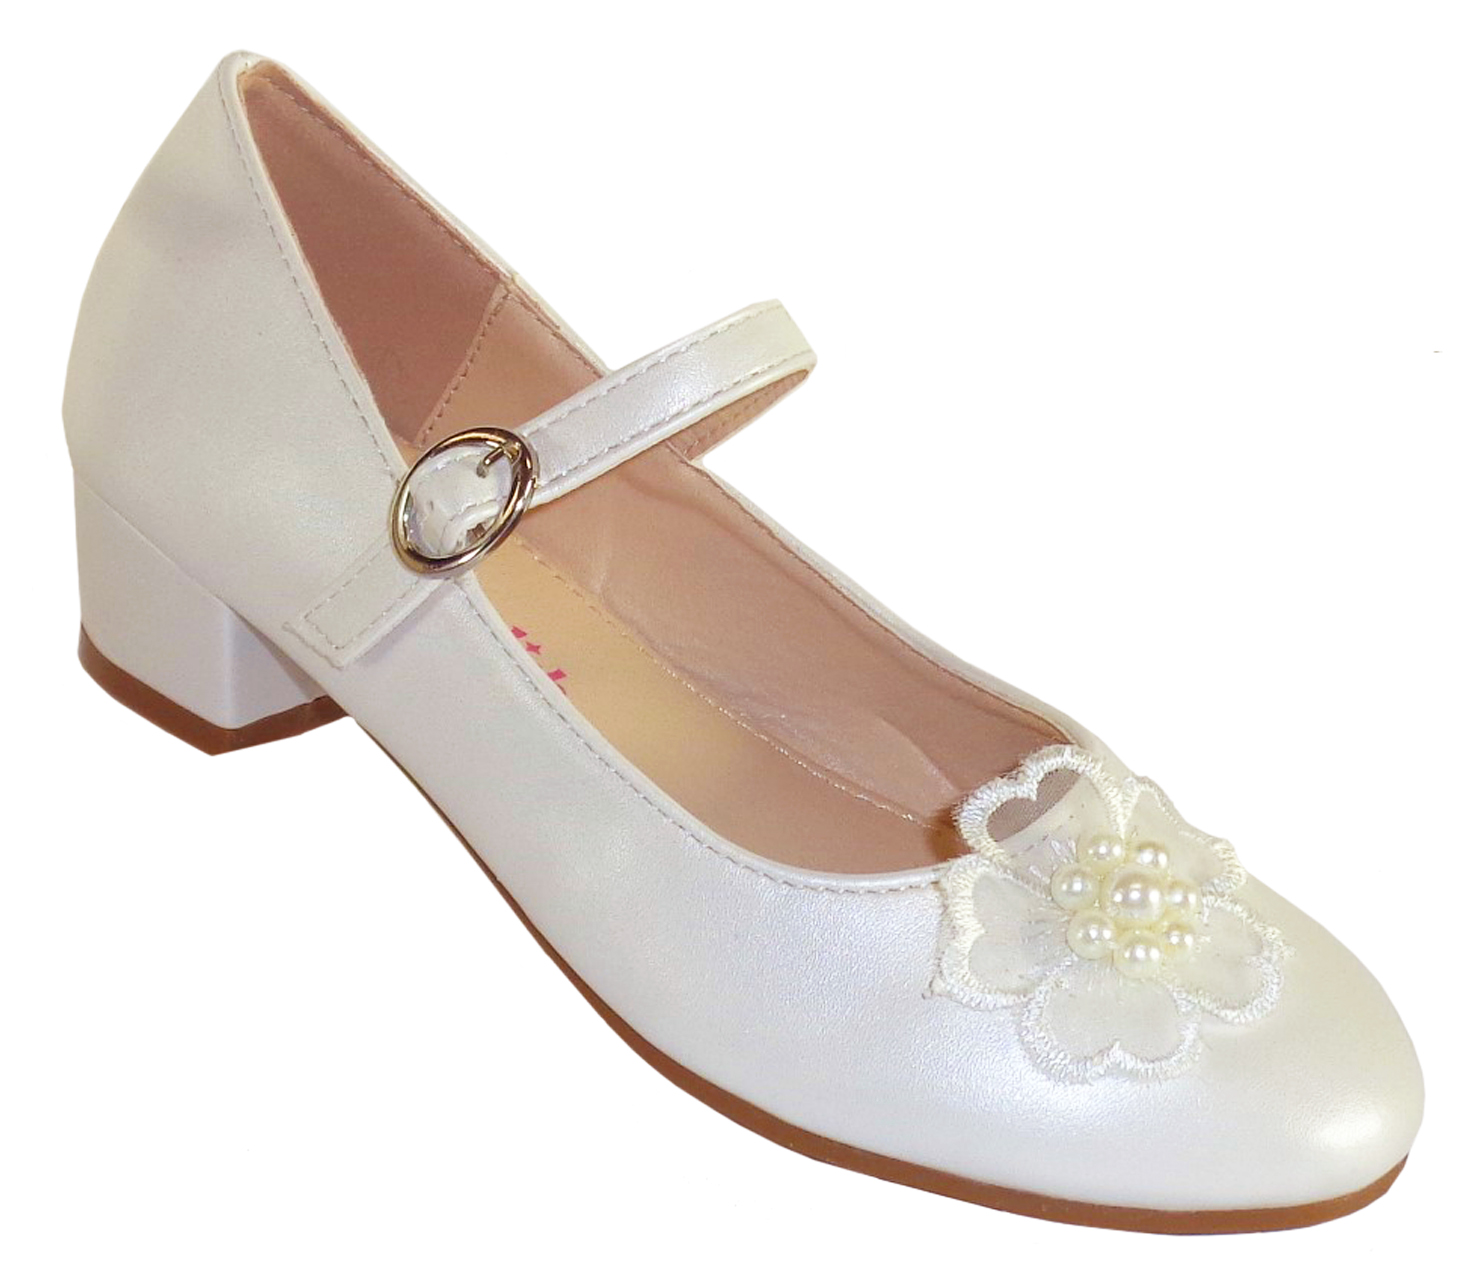 Girls ivory low heeled bridesmaid shoes and bag with flower trim-6546